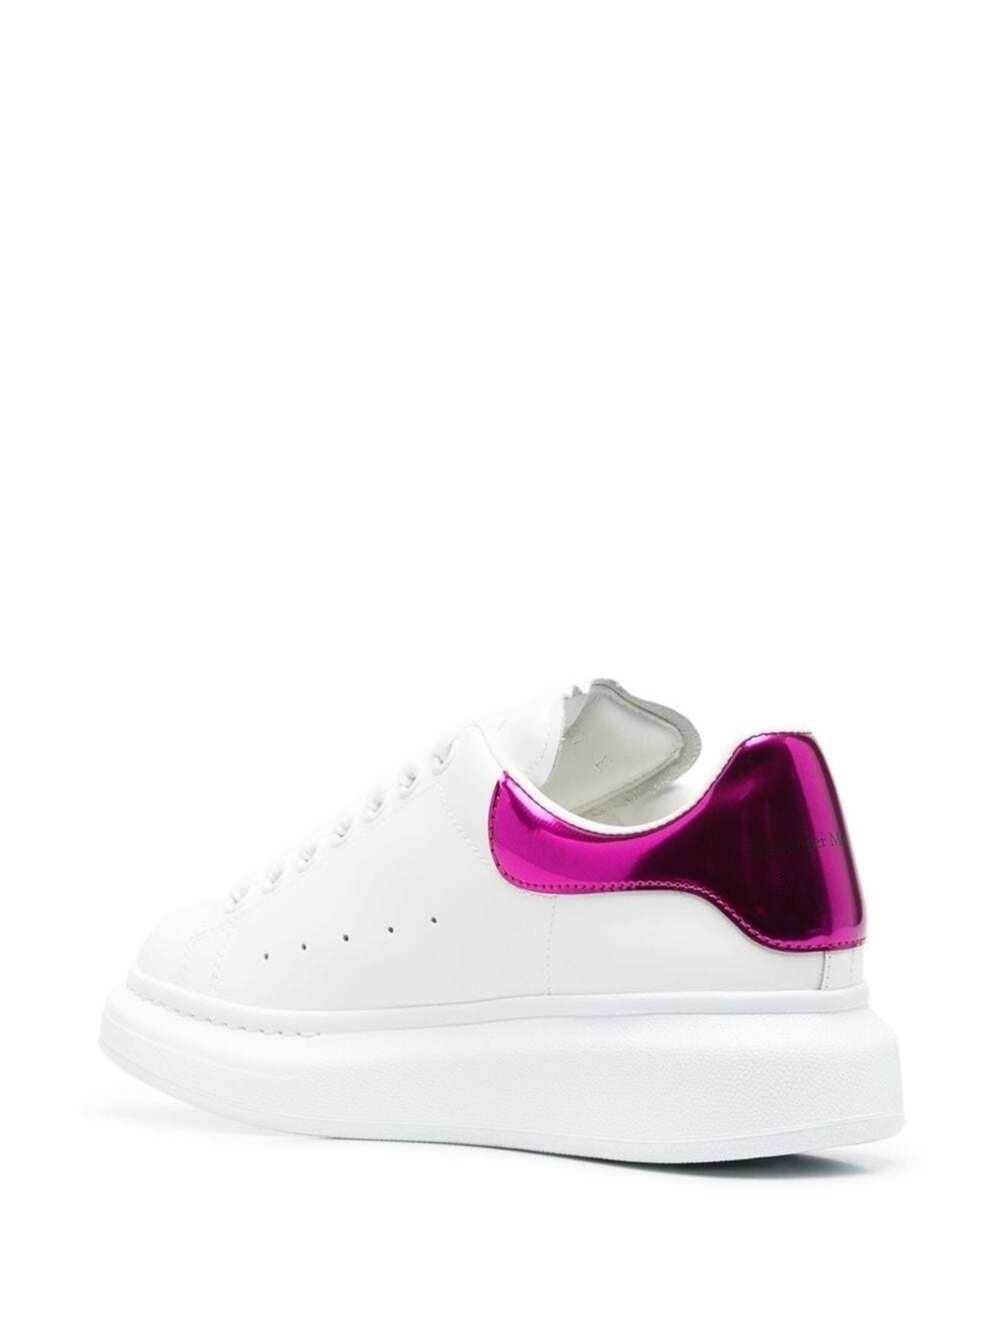 Alexander McQueen Sneakers With Platform And Metallic Fuchsia Heel Tab In  Leather in White